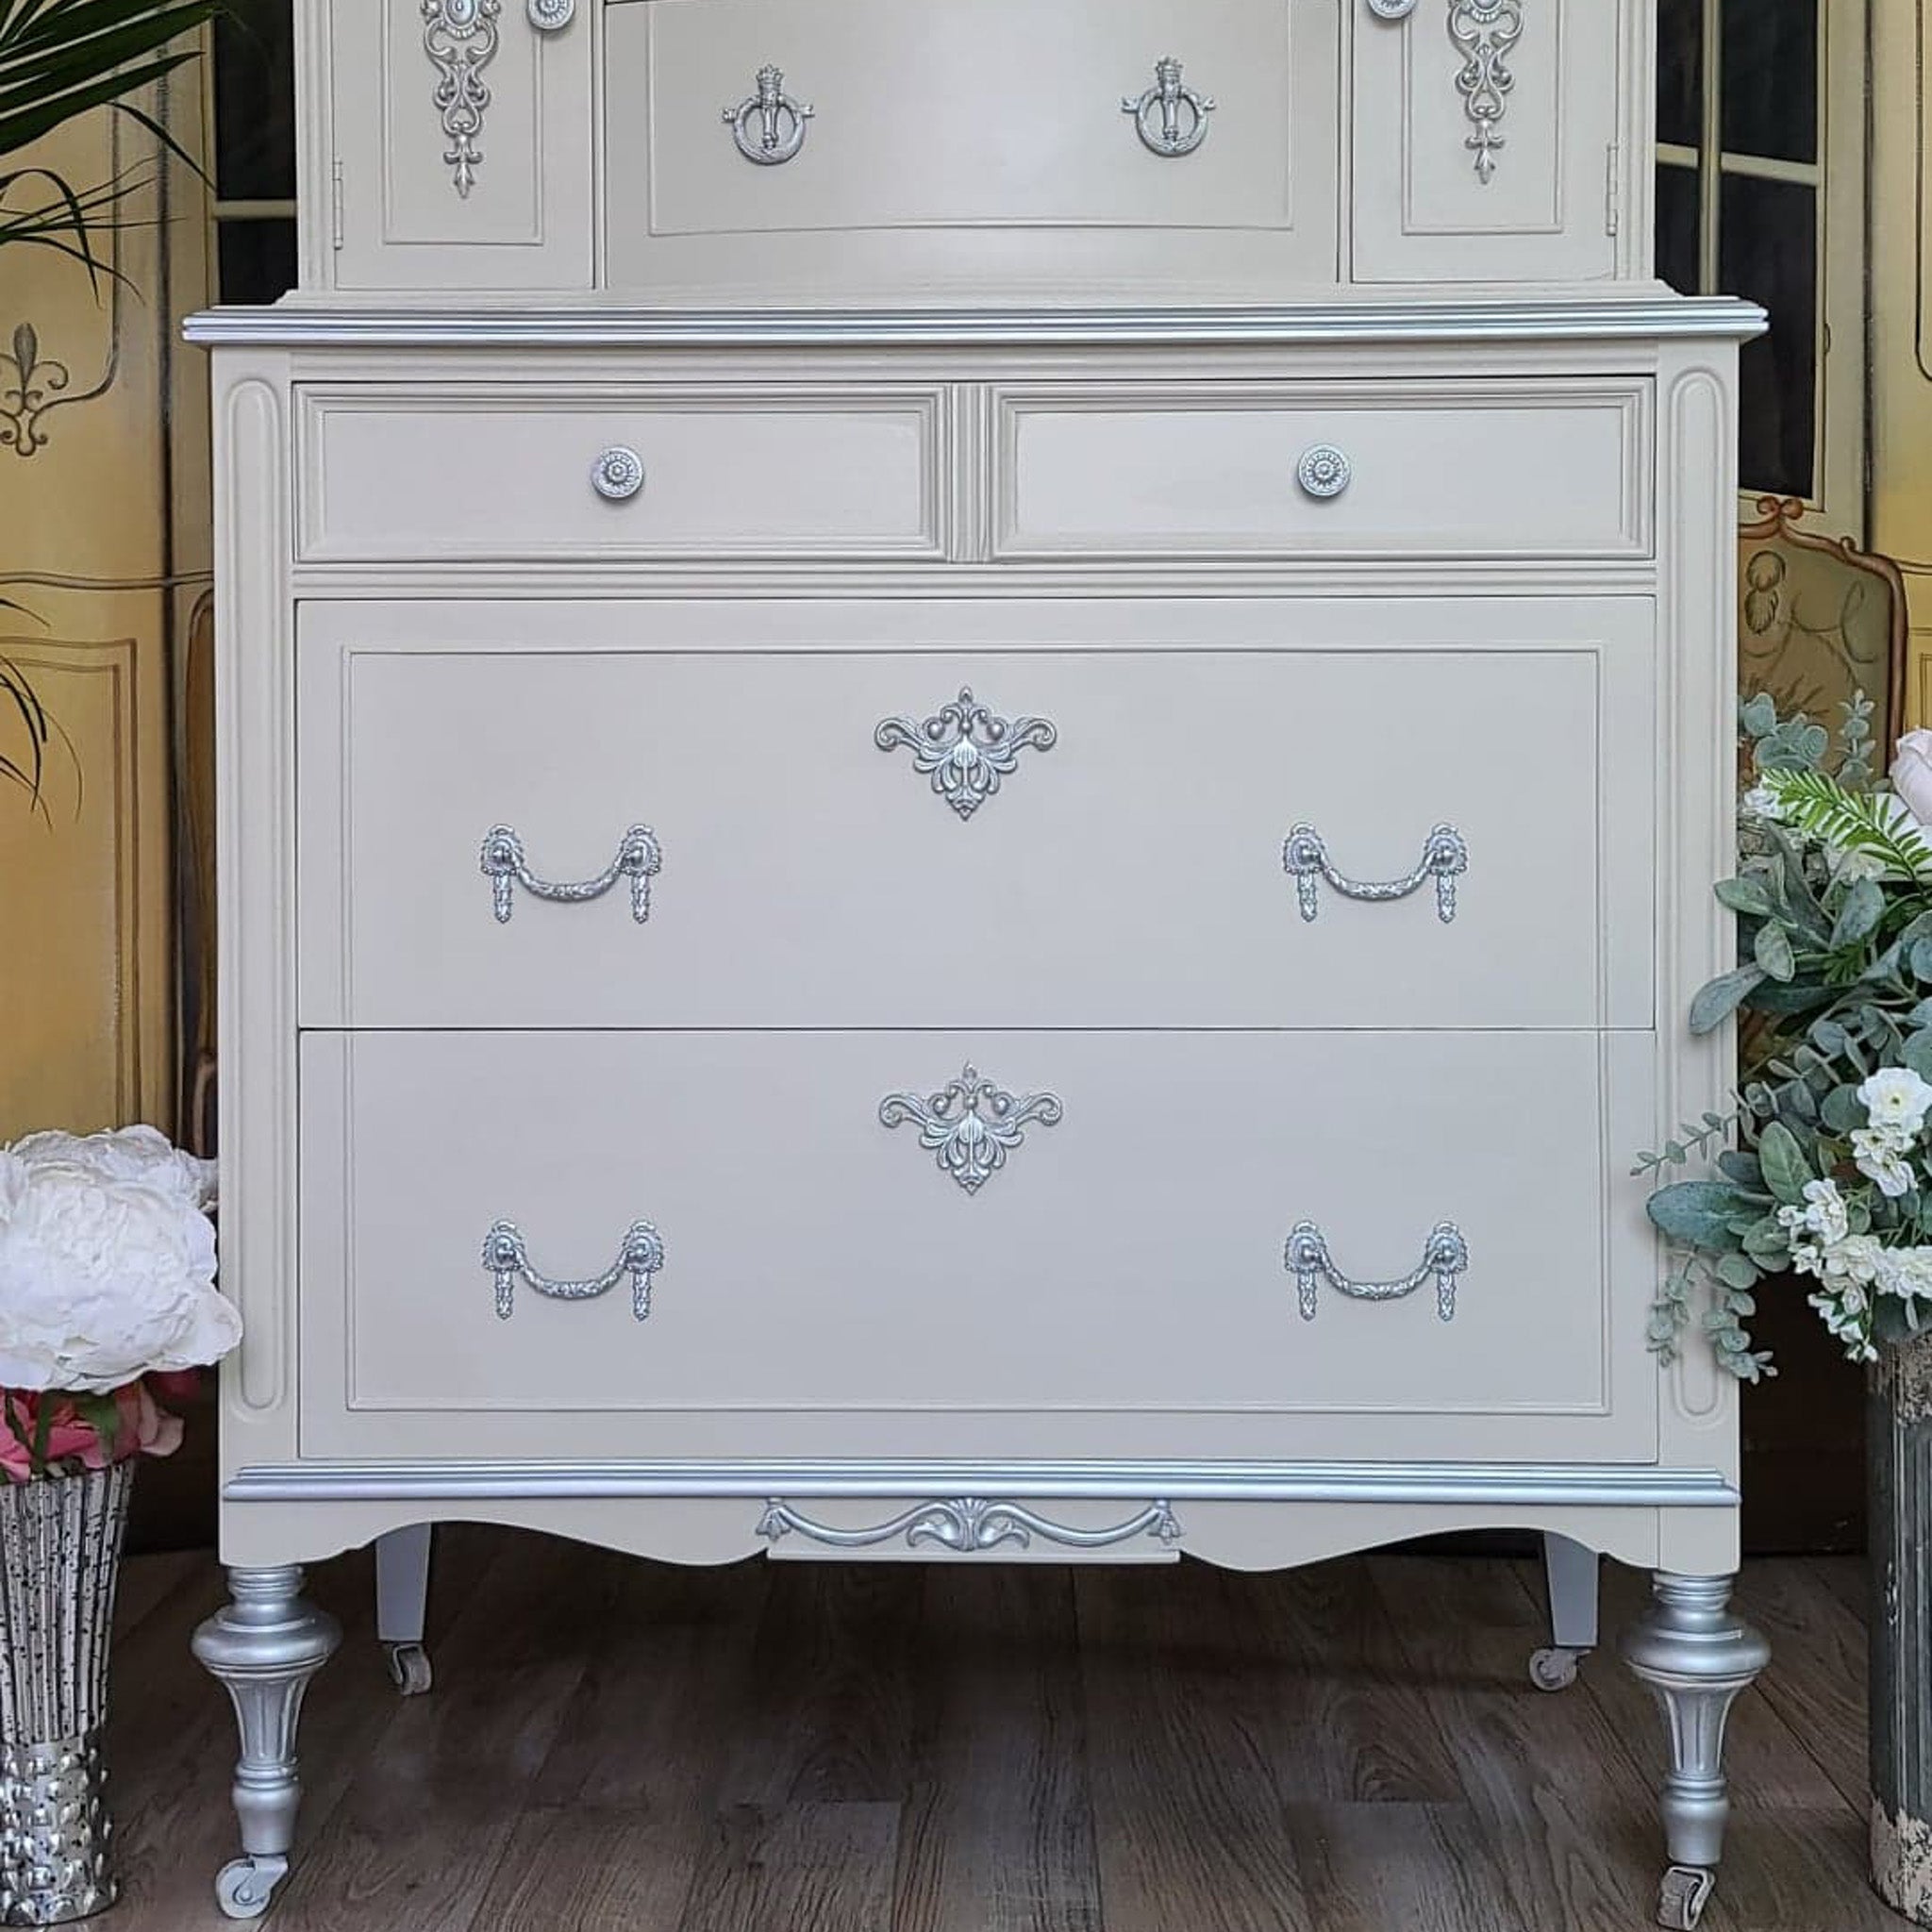 A close-up of a vintage lingerie dresser is painted in Dixie Belle's Sawmill Gravy chalk mineral paint.